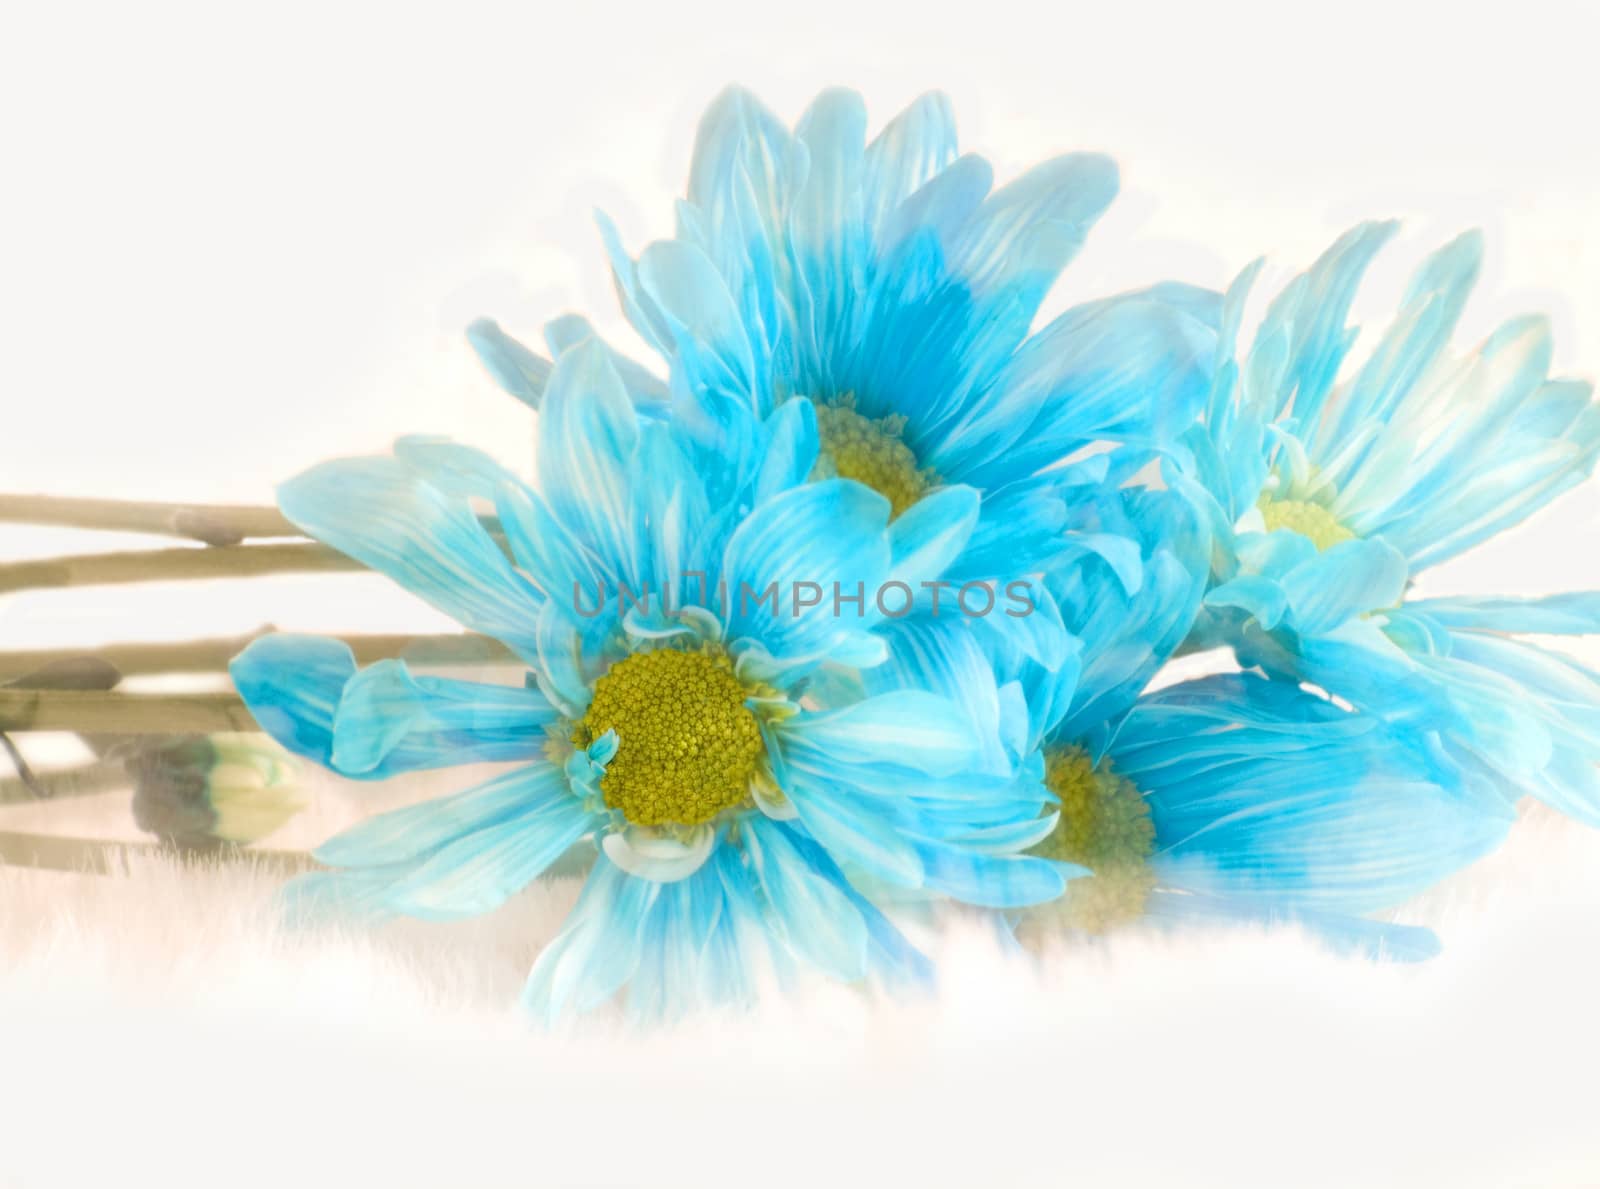 blue daisies abstract by debramillet